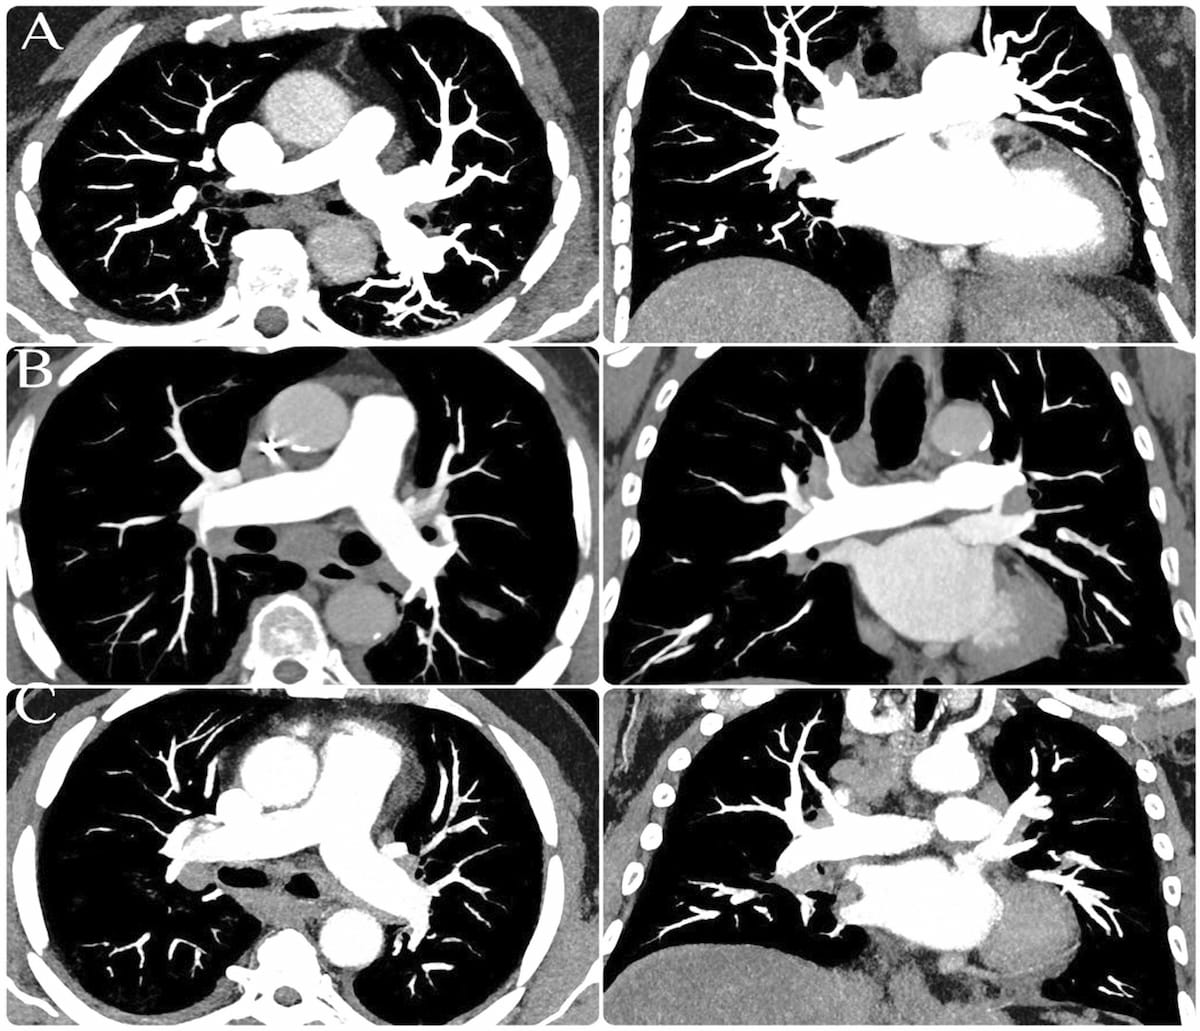 Study: Photon-Counting CT for Pulmonary Angiography Allows Significant ICM Reduction (Images courtesy of Academic Radiology.)